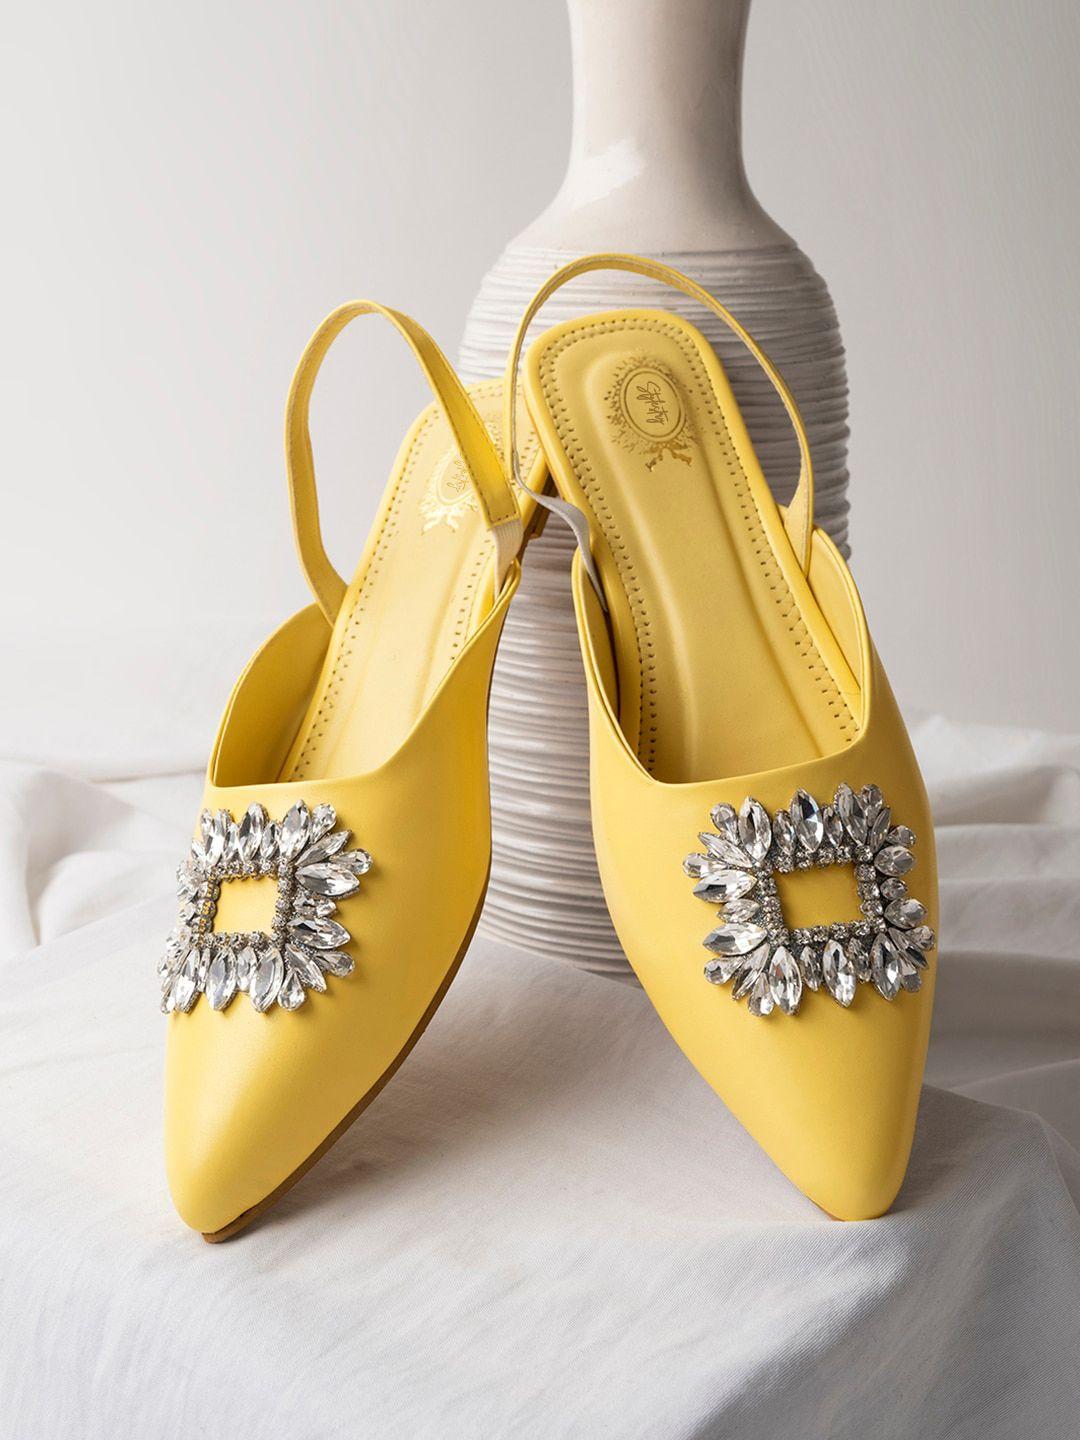 stylestry pointed toe embellished mules